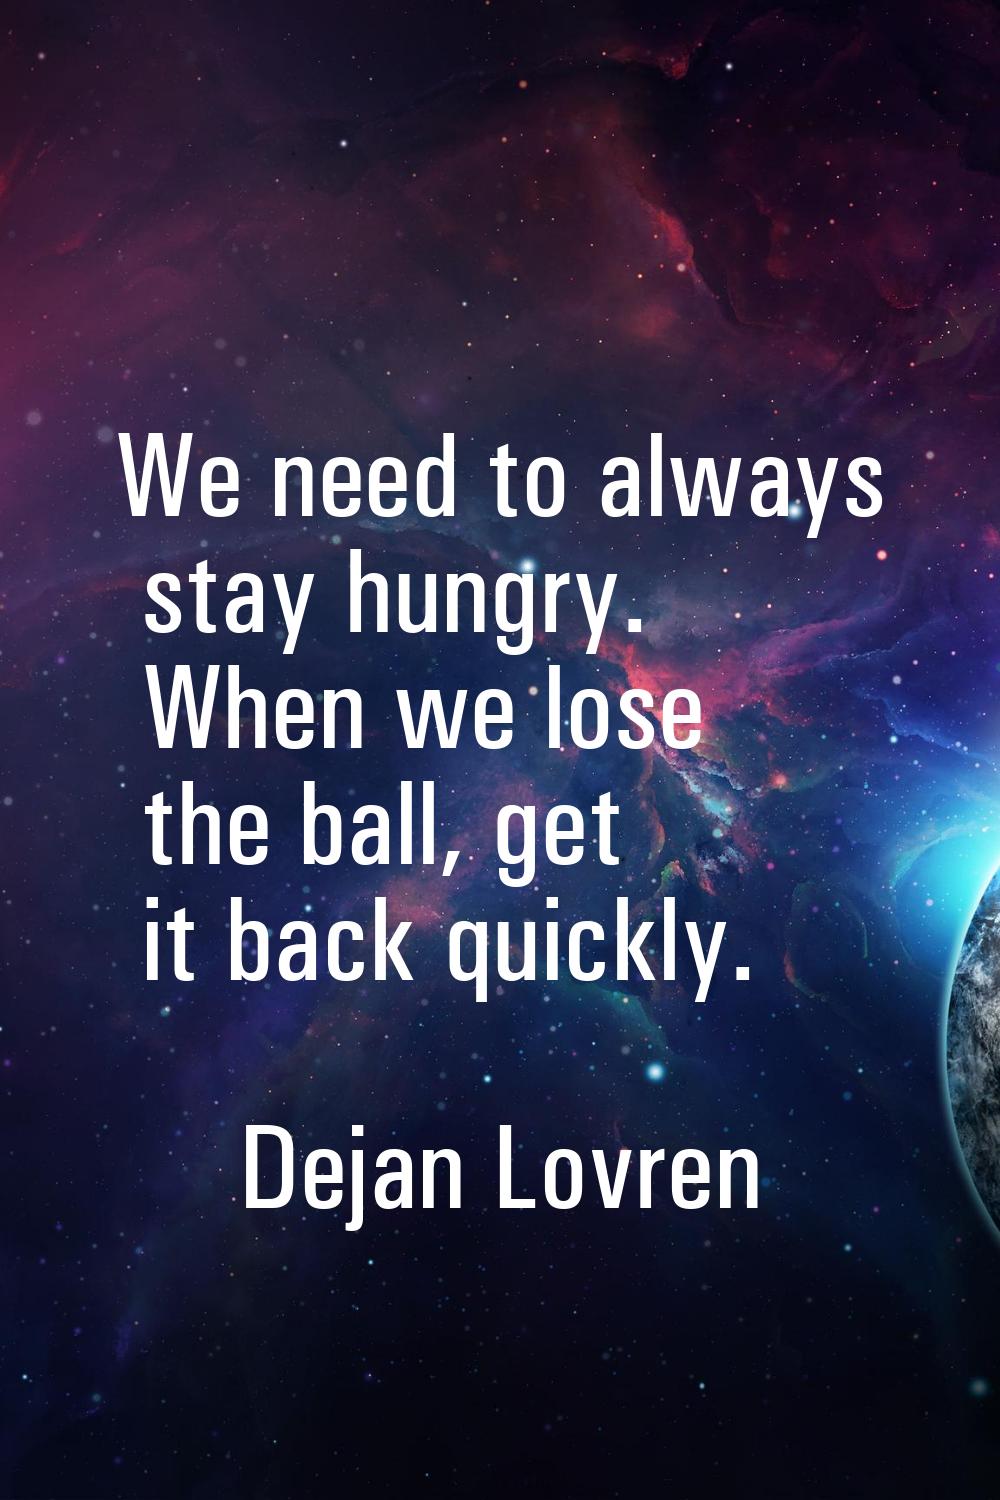 We need to always stay hungry. When we lose the ball, get it back quickly.